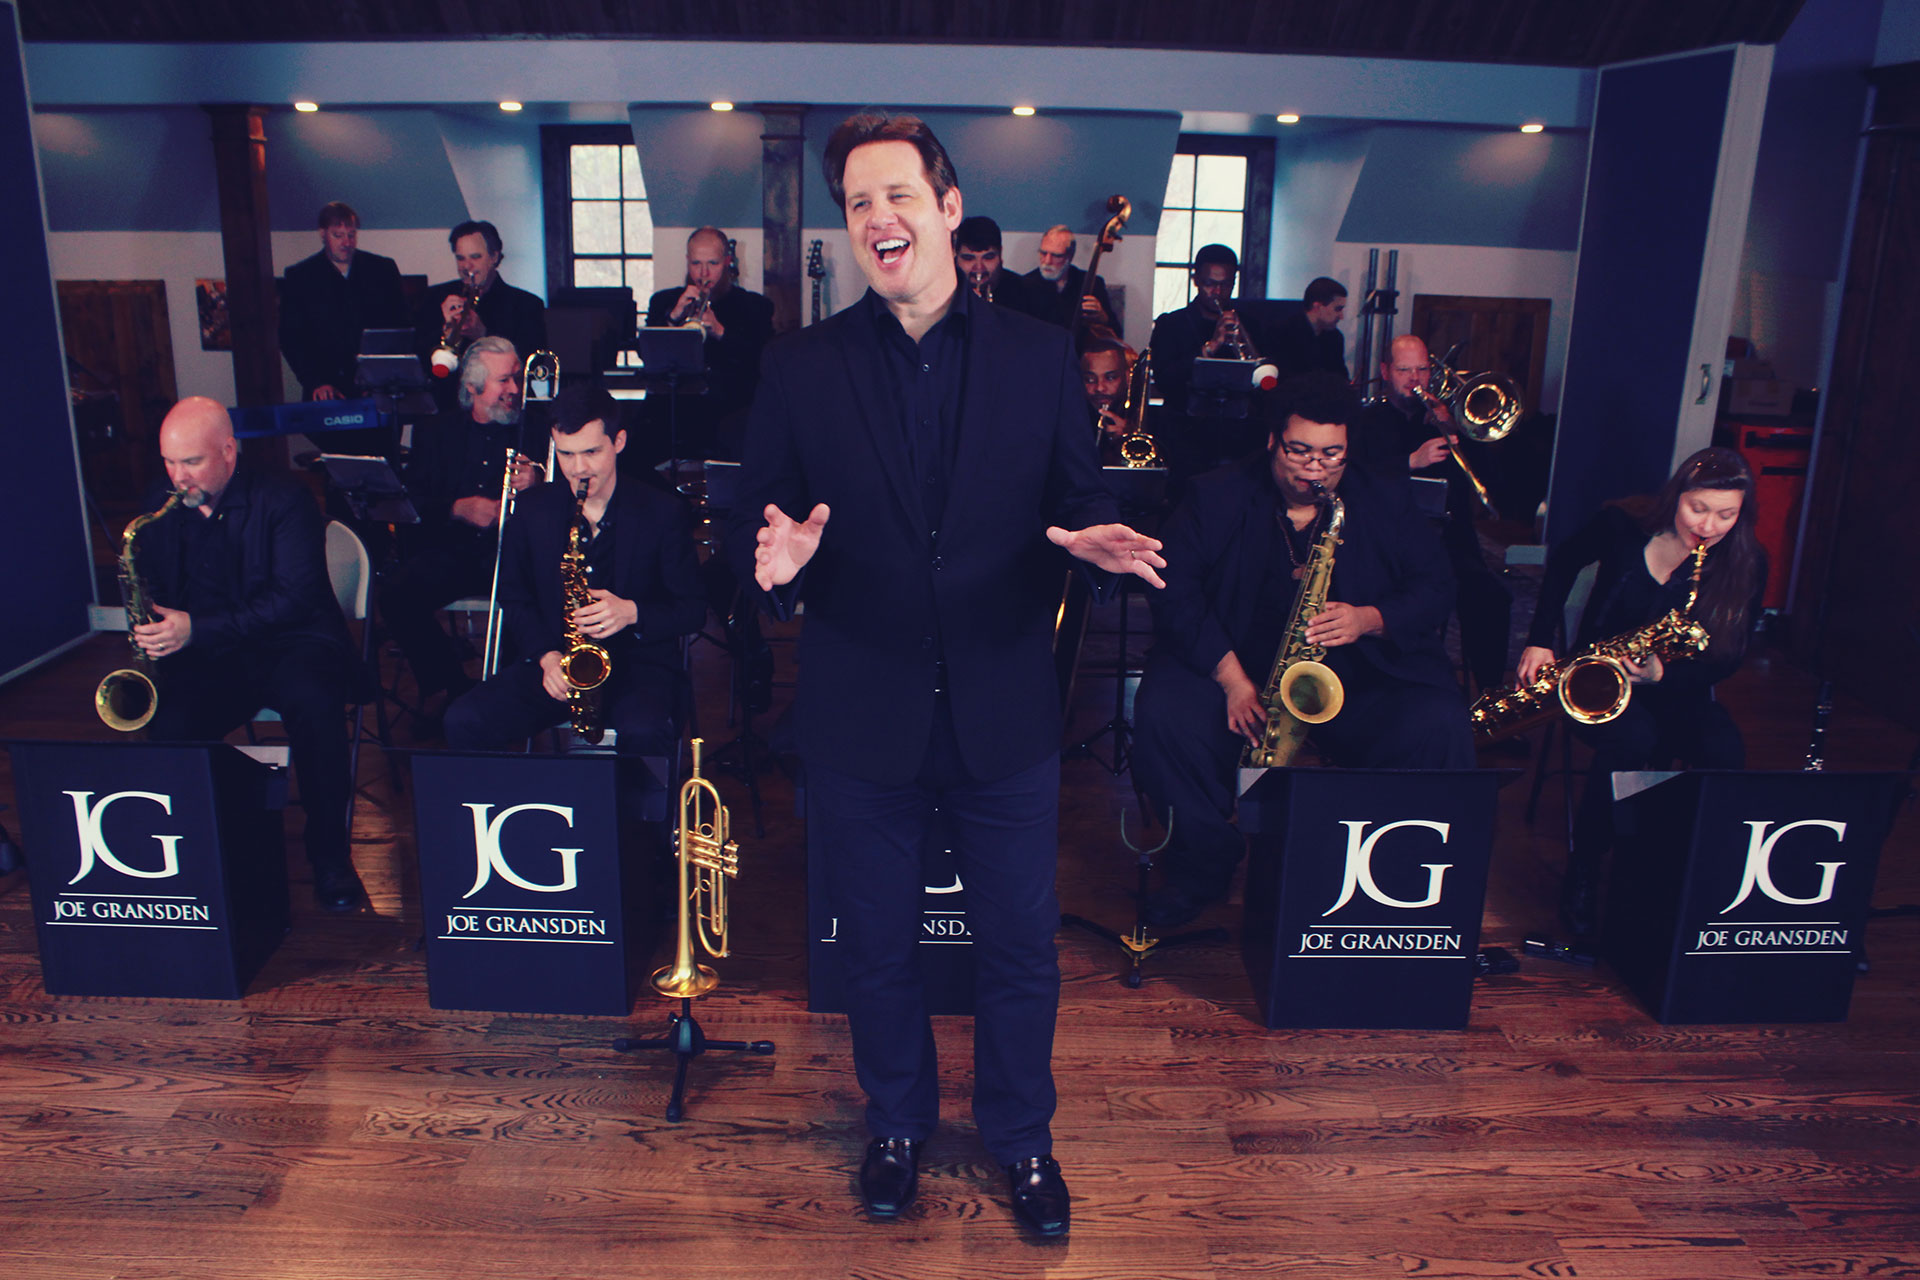 oe Gransden, swing singer and trumpeter with his band will come to Peachtree Road in September.